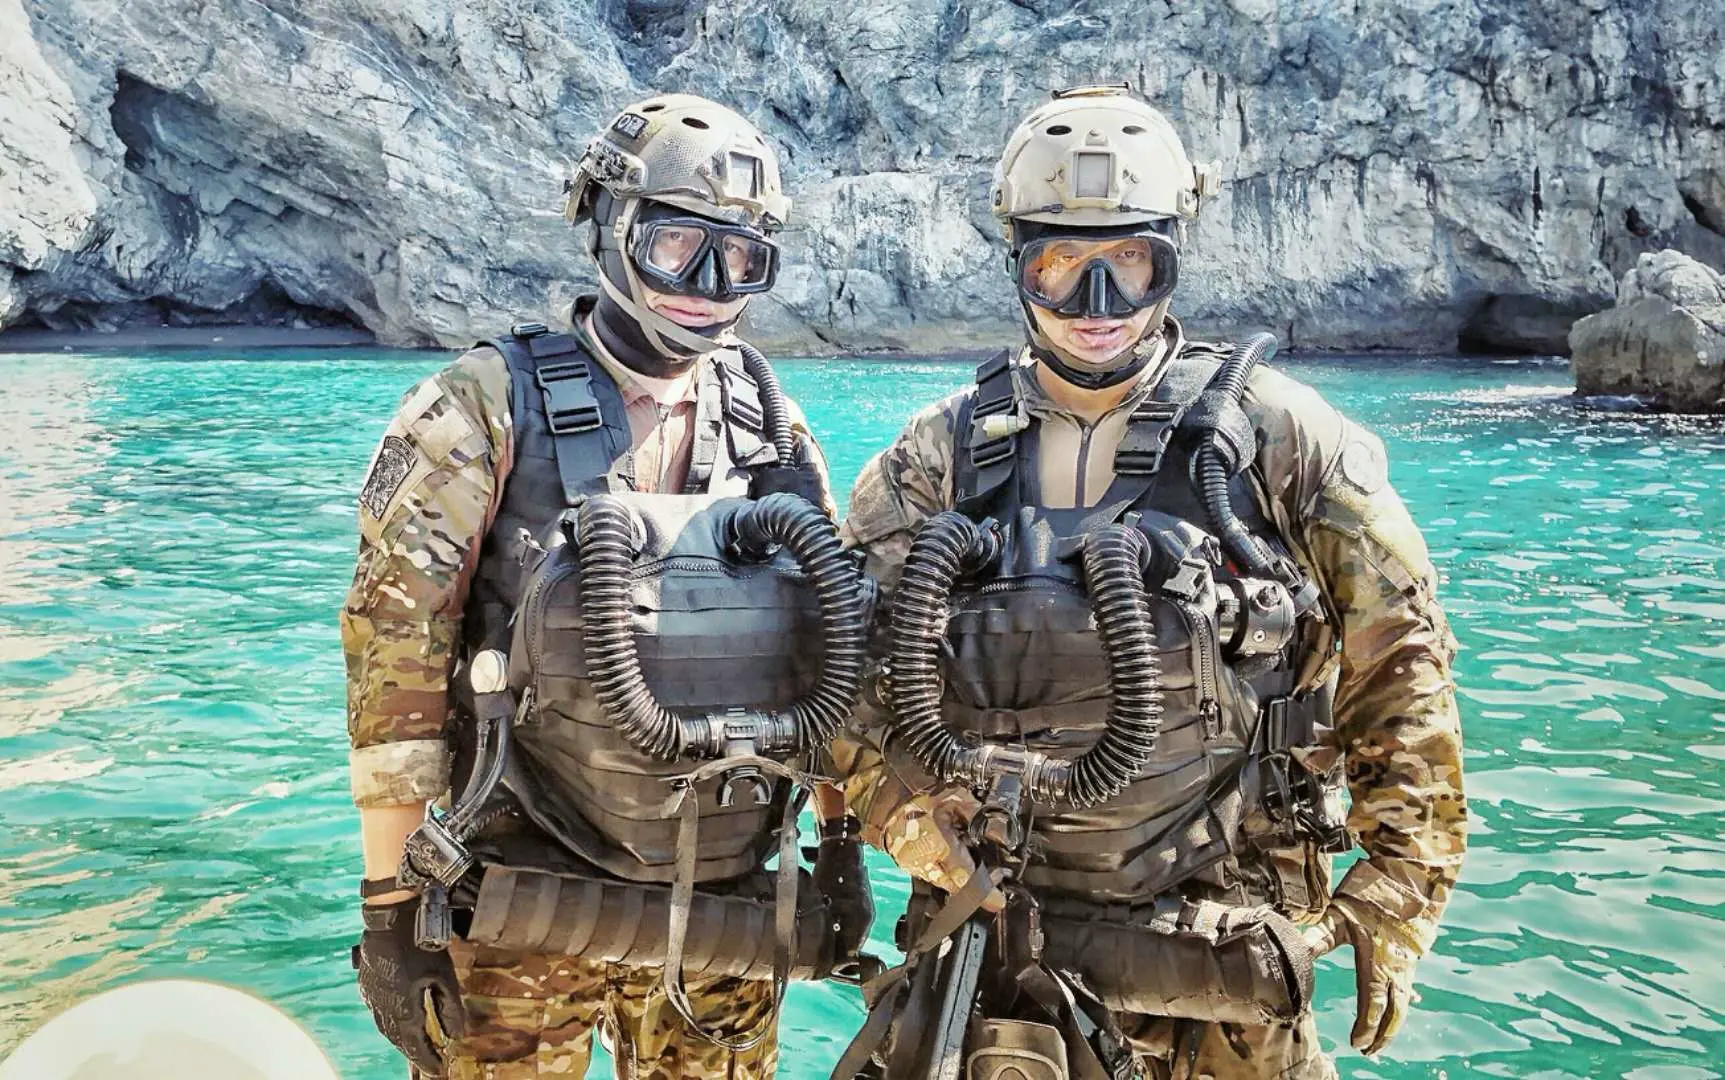 The ultimate test of Special Forces' nerves | Sandboxx